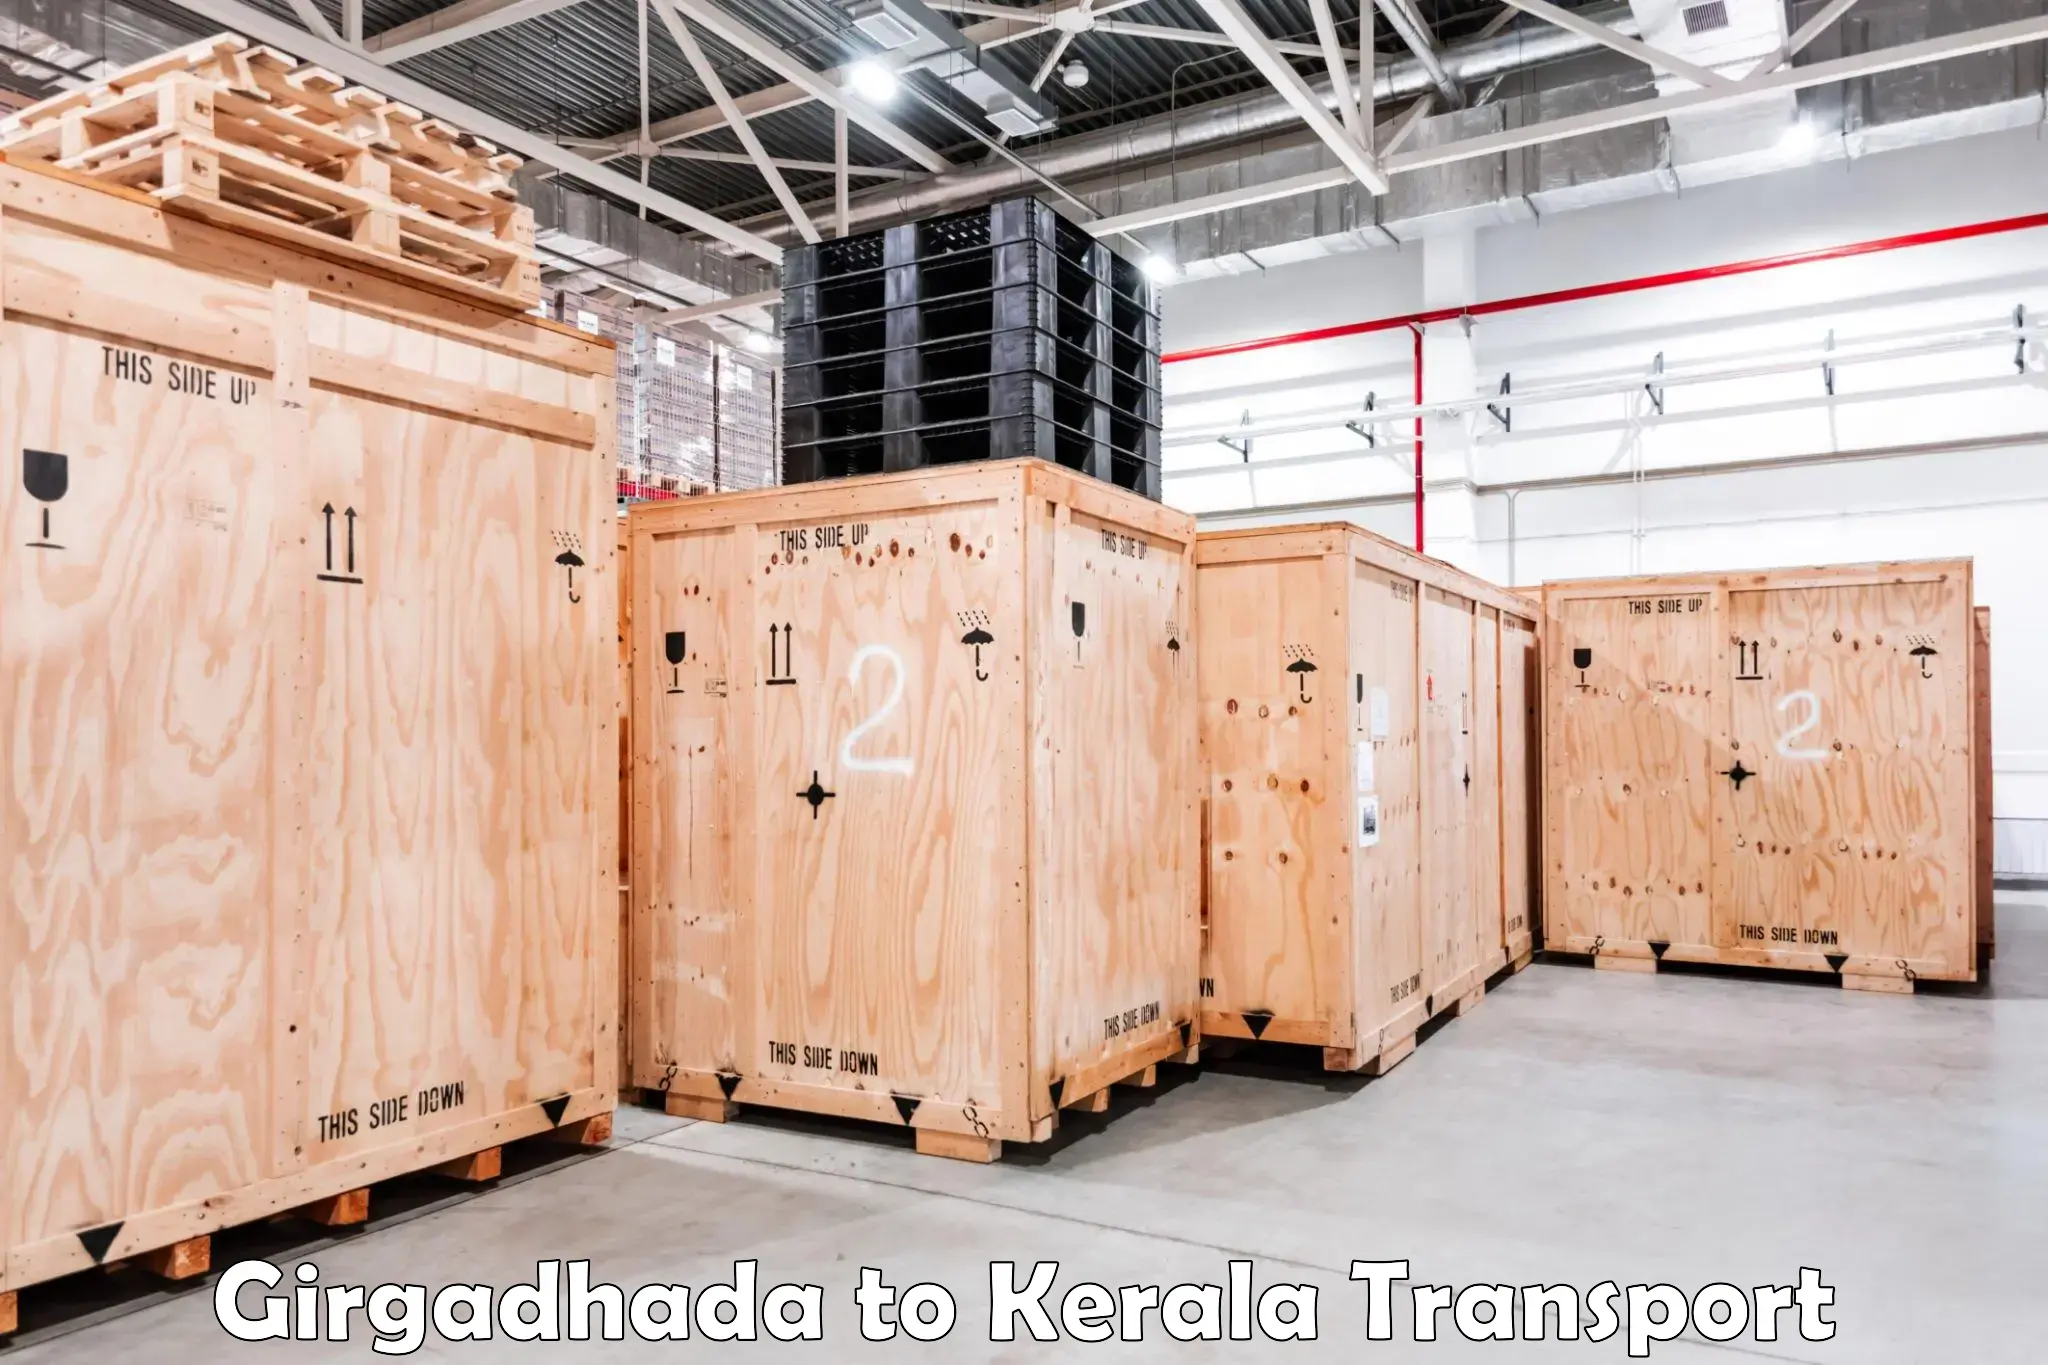 Daily parcel service transport Girgadhada to Mananthavady